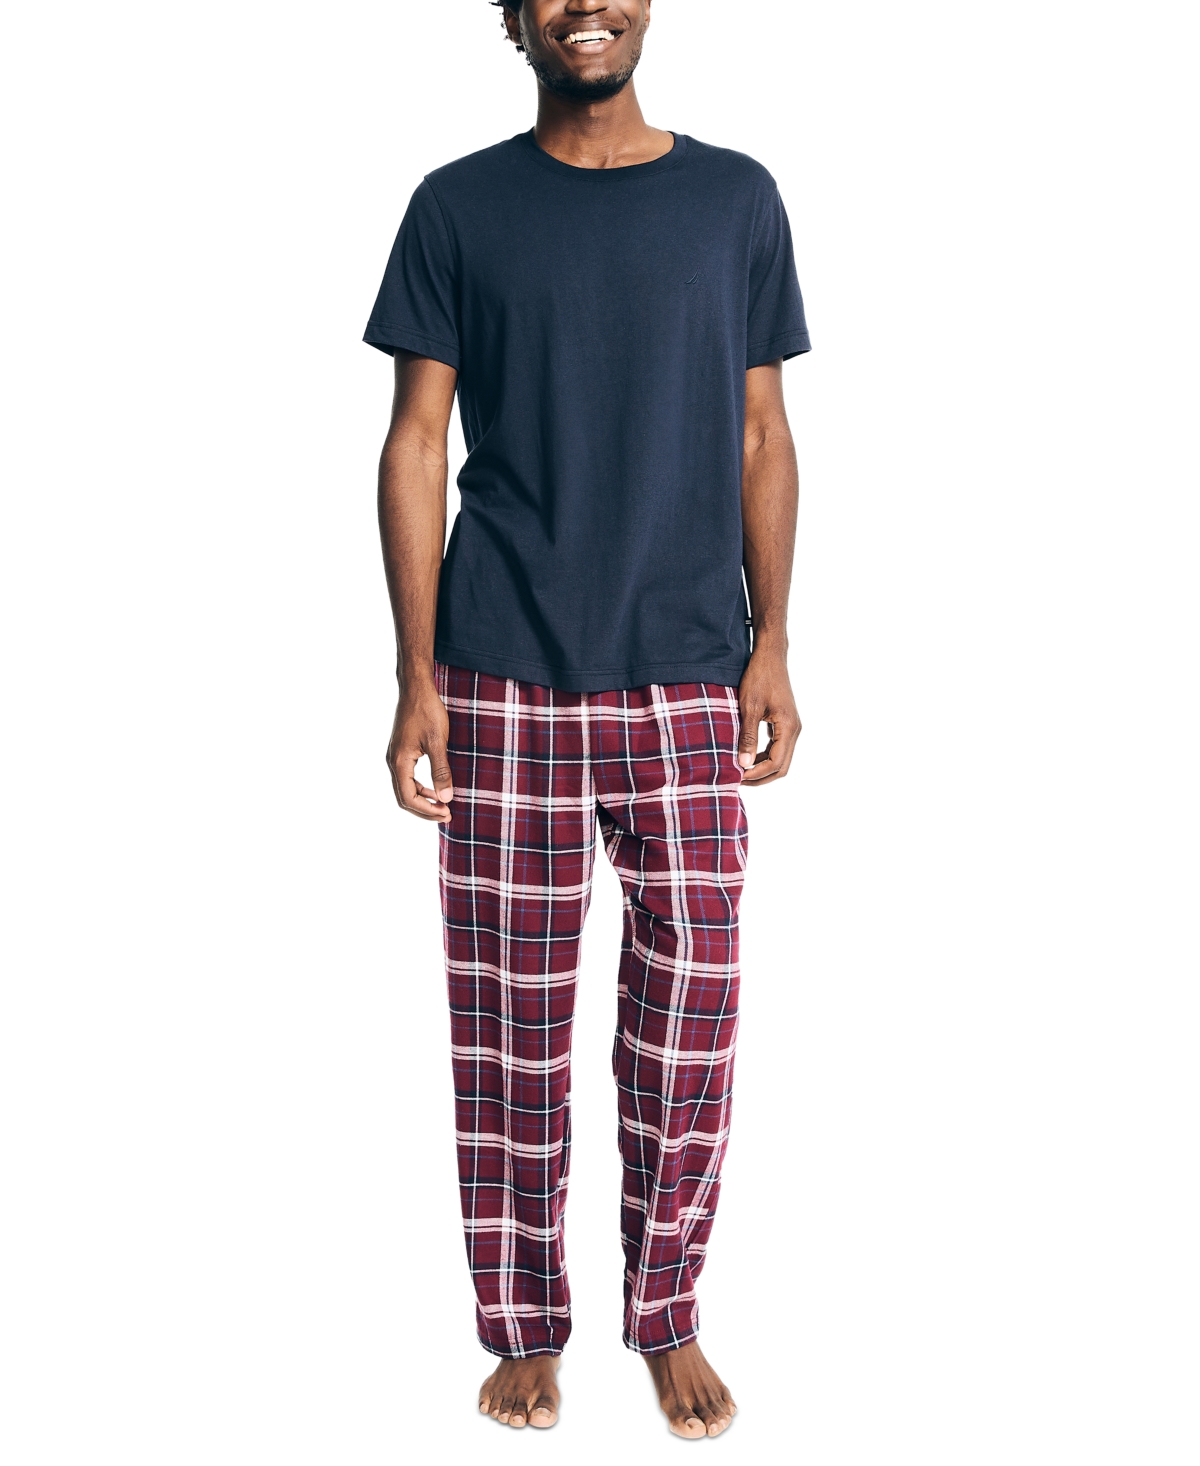 Nautica Nauitica Men's 2-pc. Classic-fit Solid T-shirt & Plaid Flannel Pajama Pants Set In Navy